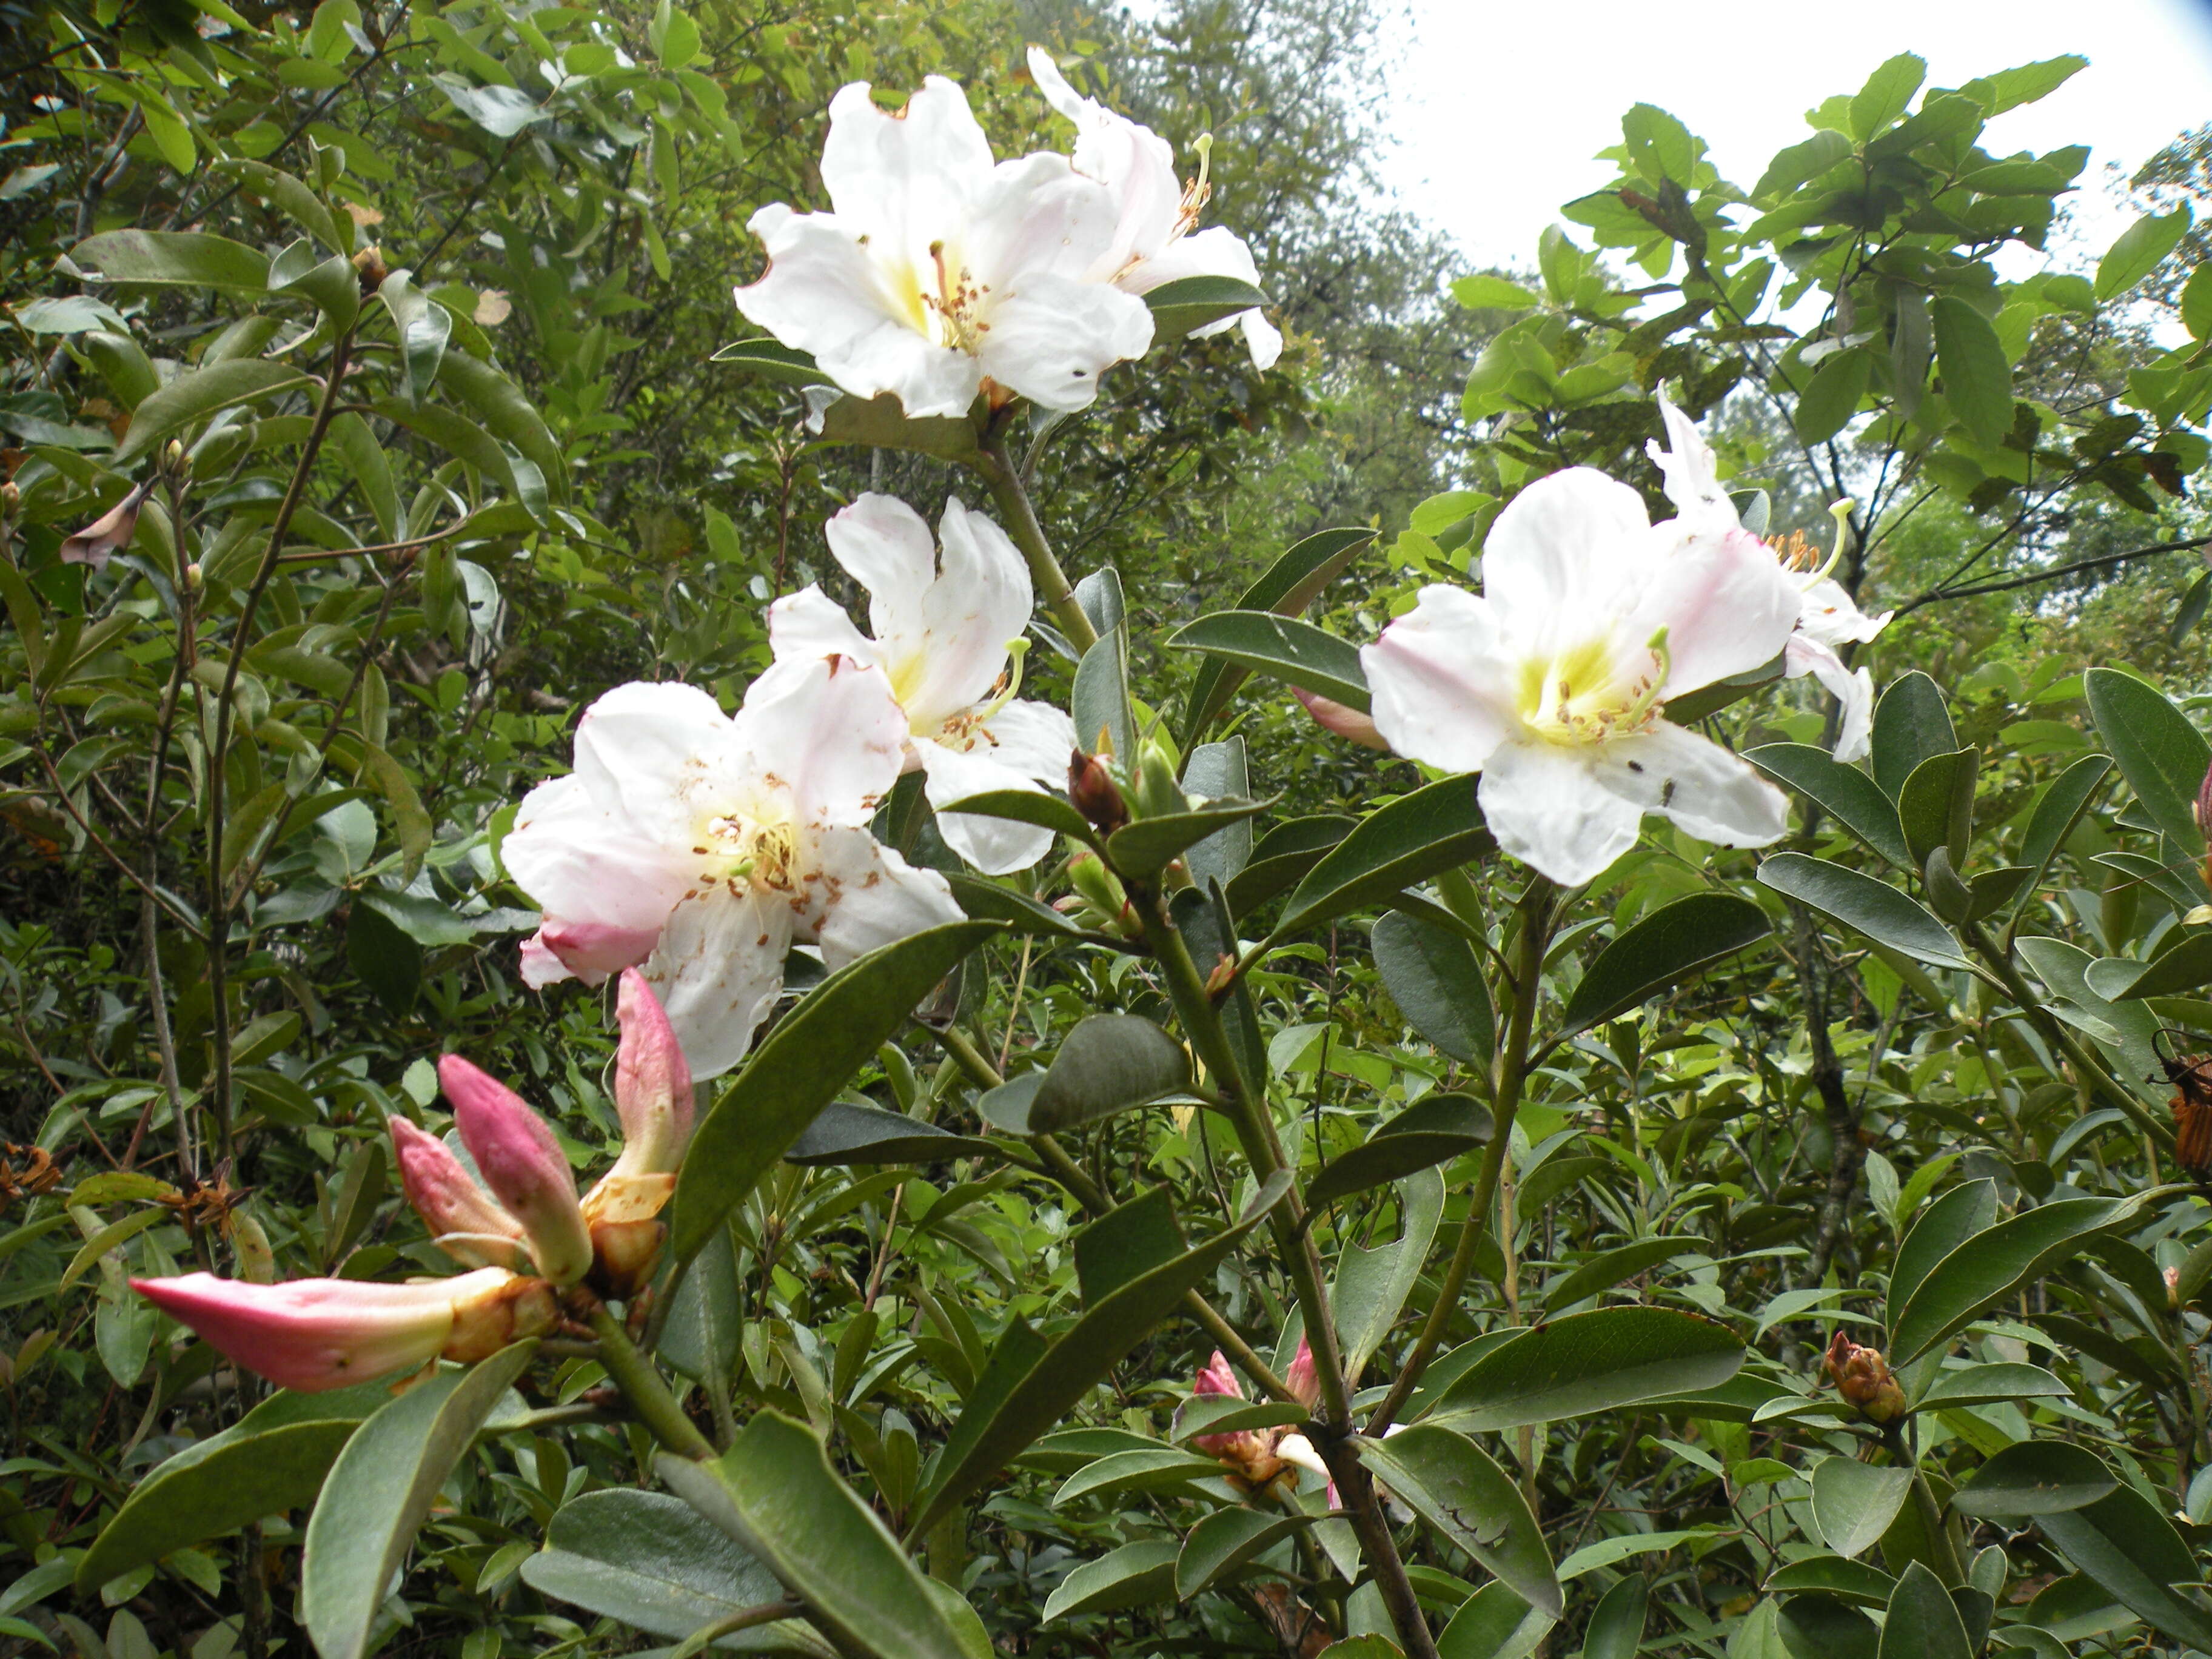 Image of Rhododendron maddenii Hook. fil.